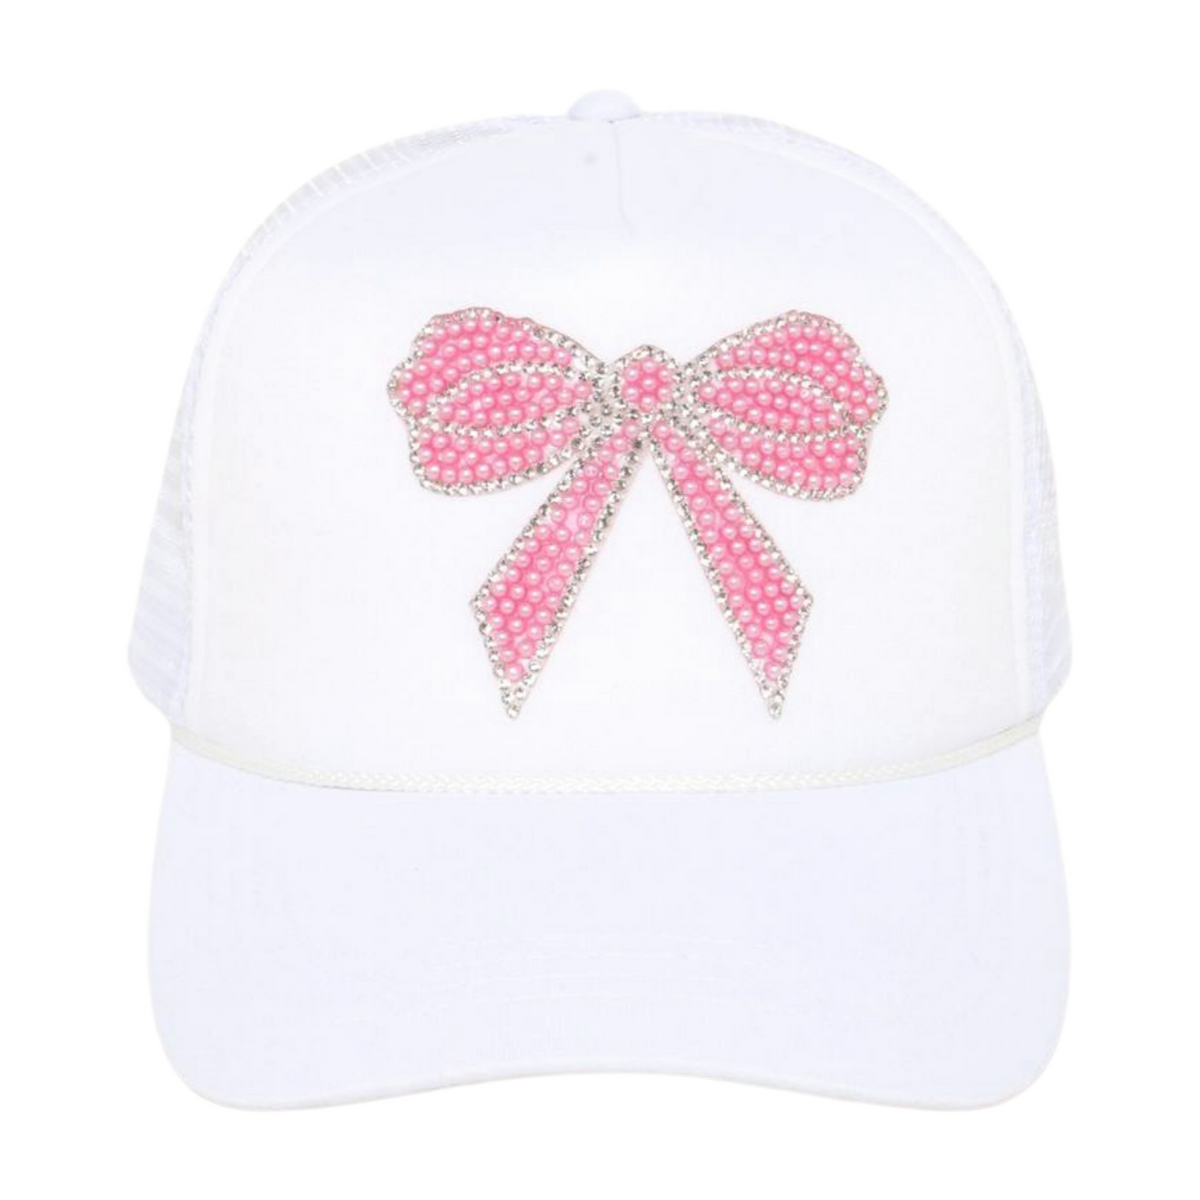 LCAPM3929 - PEARL DESIGNED PINK BOW ON SOLID TRUCKER HAT